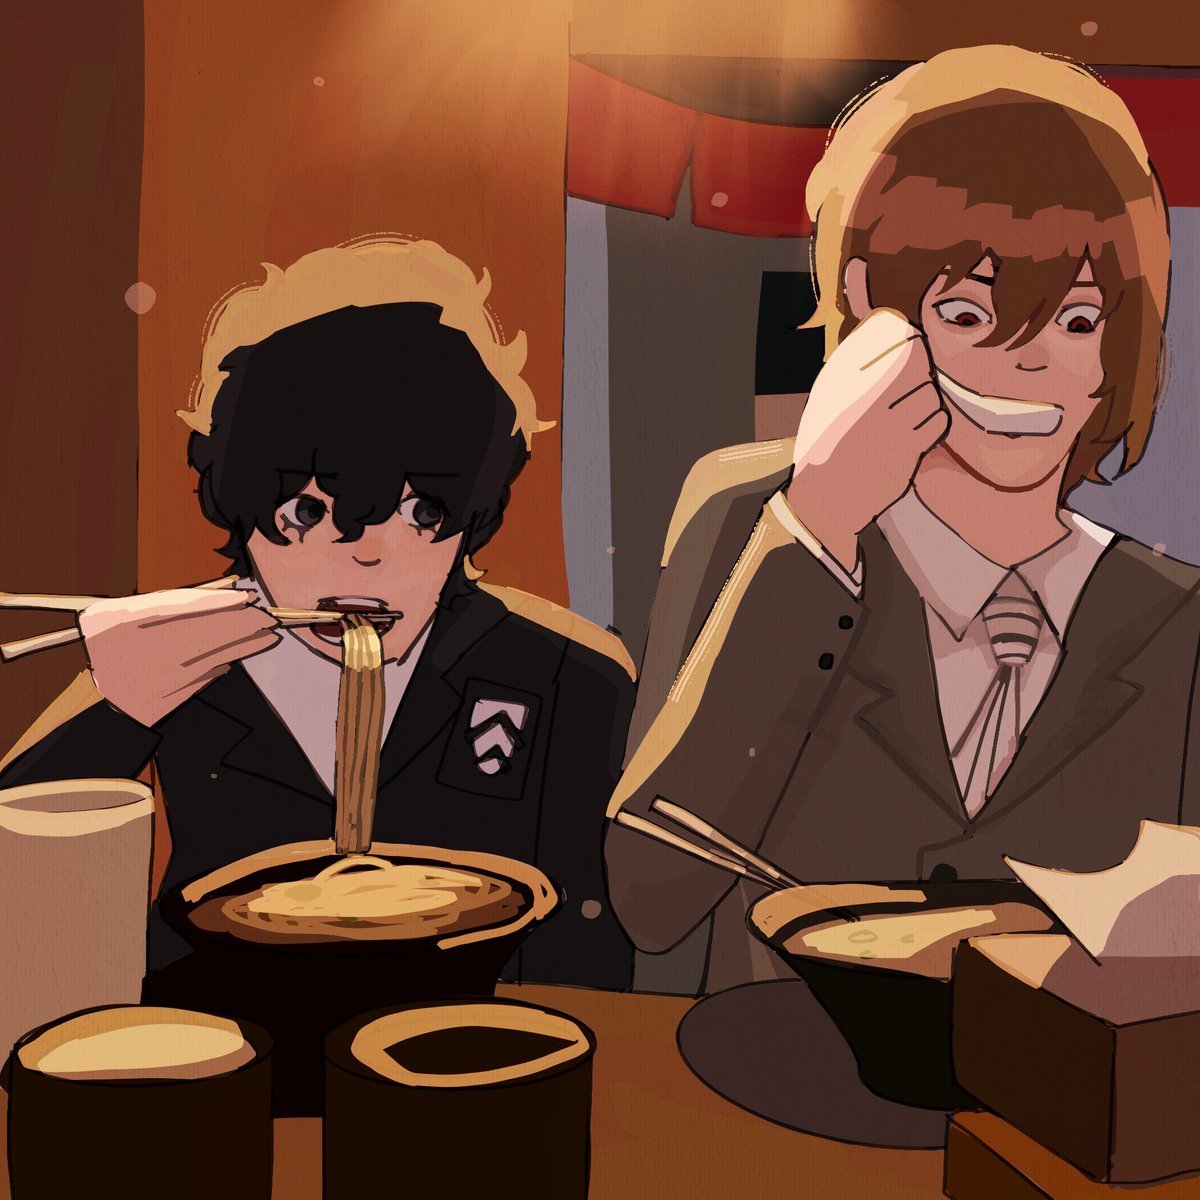 Who would pay in their relationship 
#shuake #akeshu